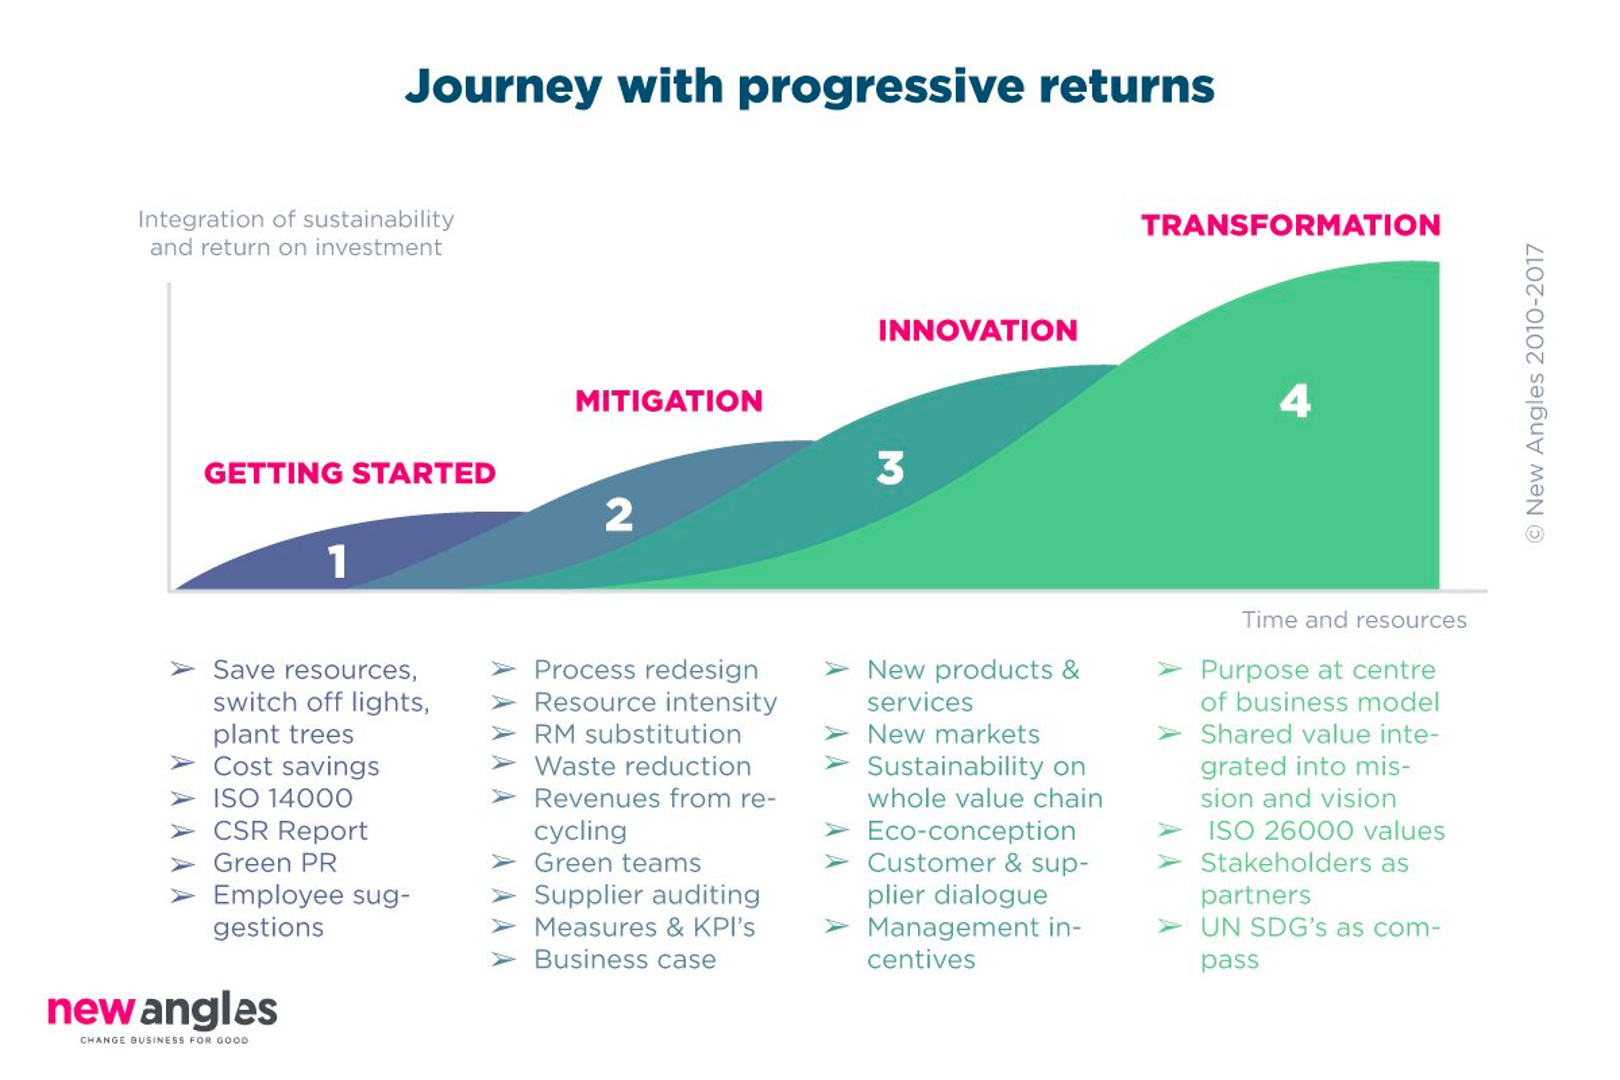 A sustainability journey with progressive returns by New Angles